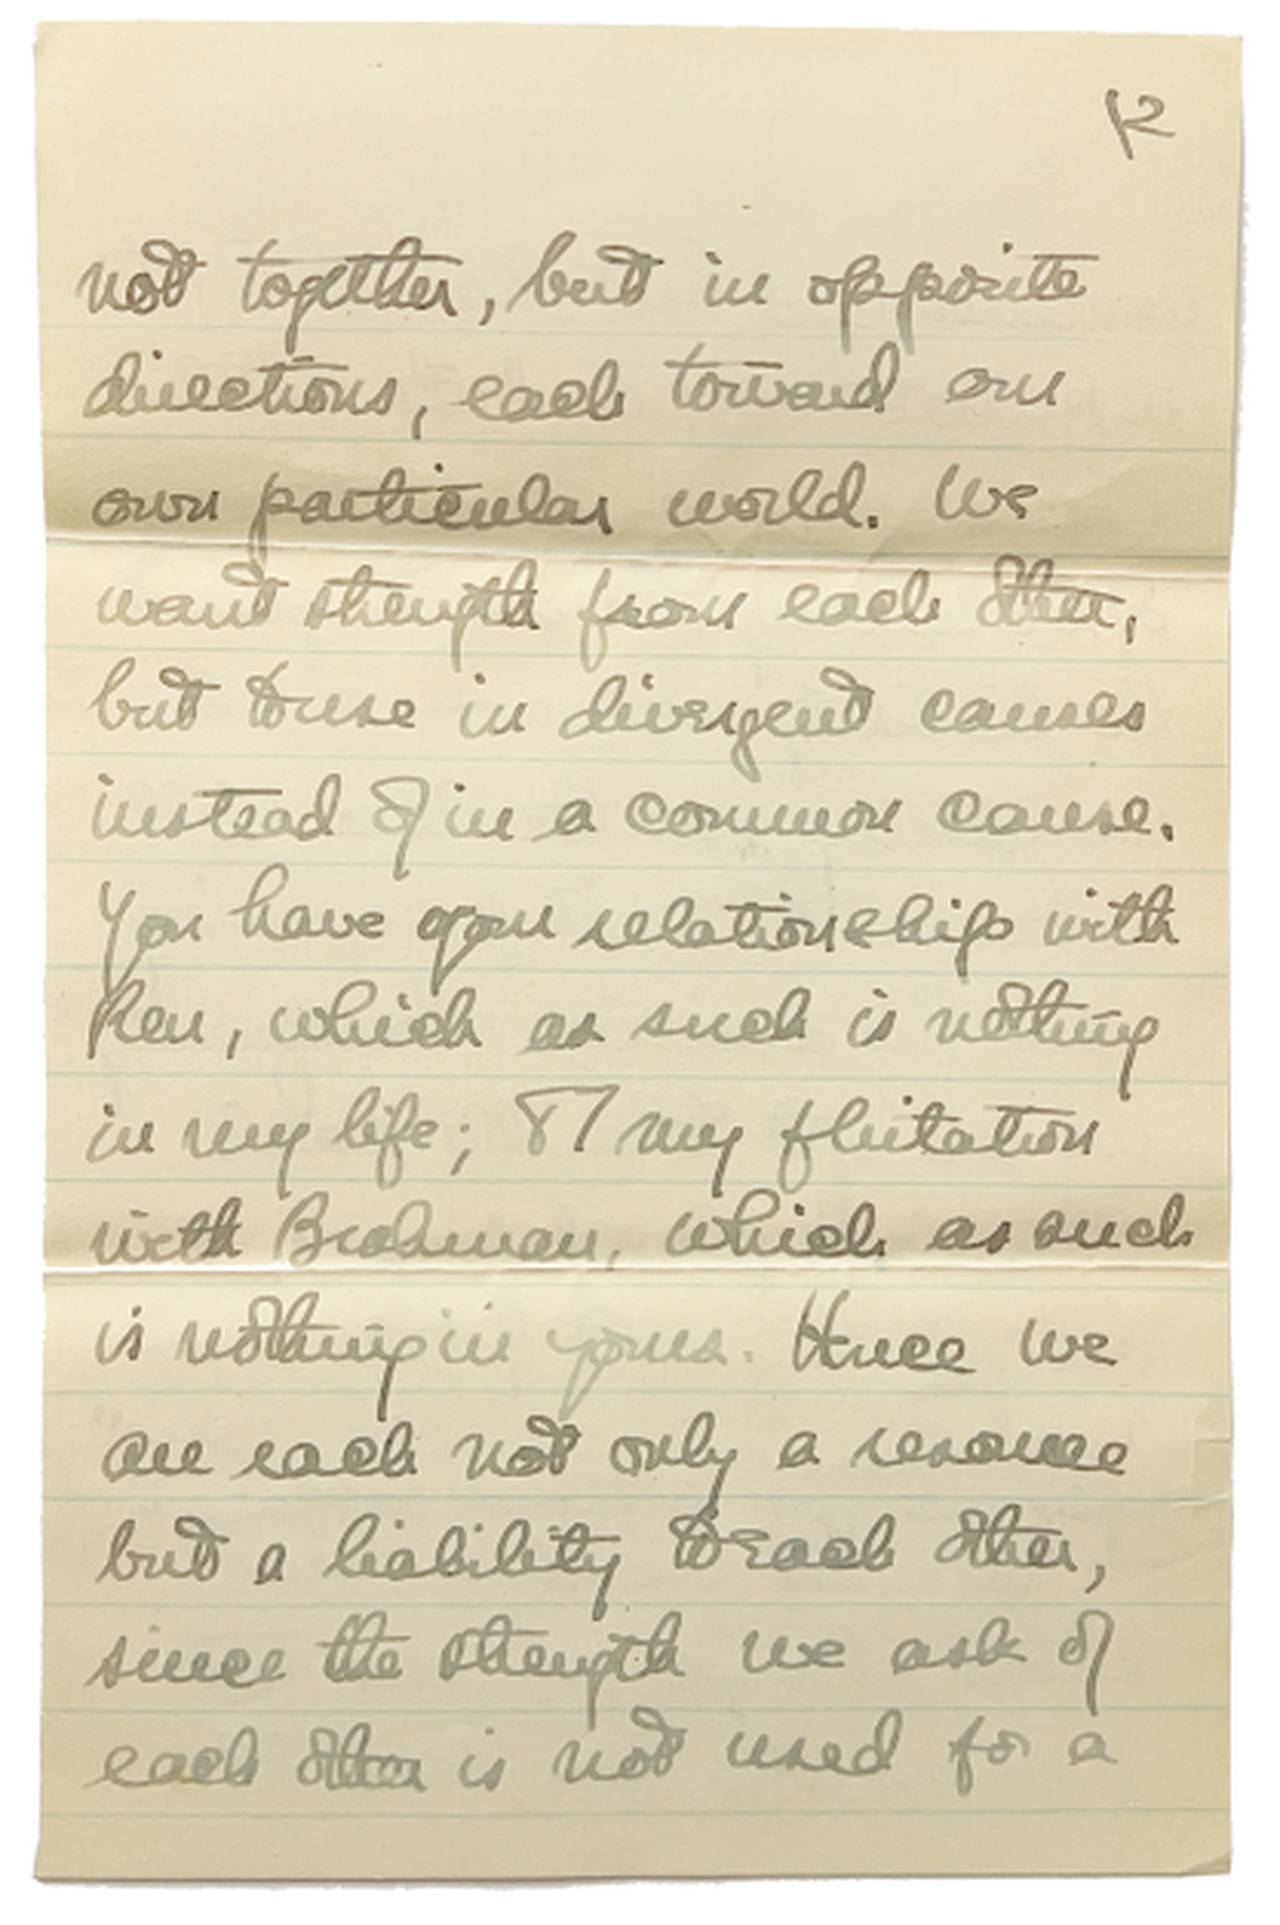 Excerpt from a letter written by R.